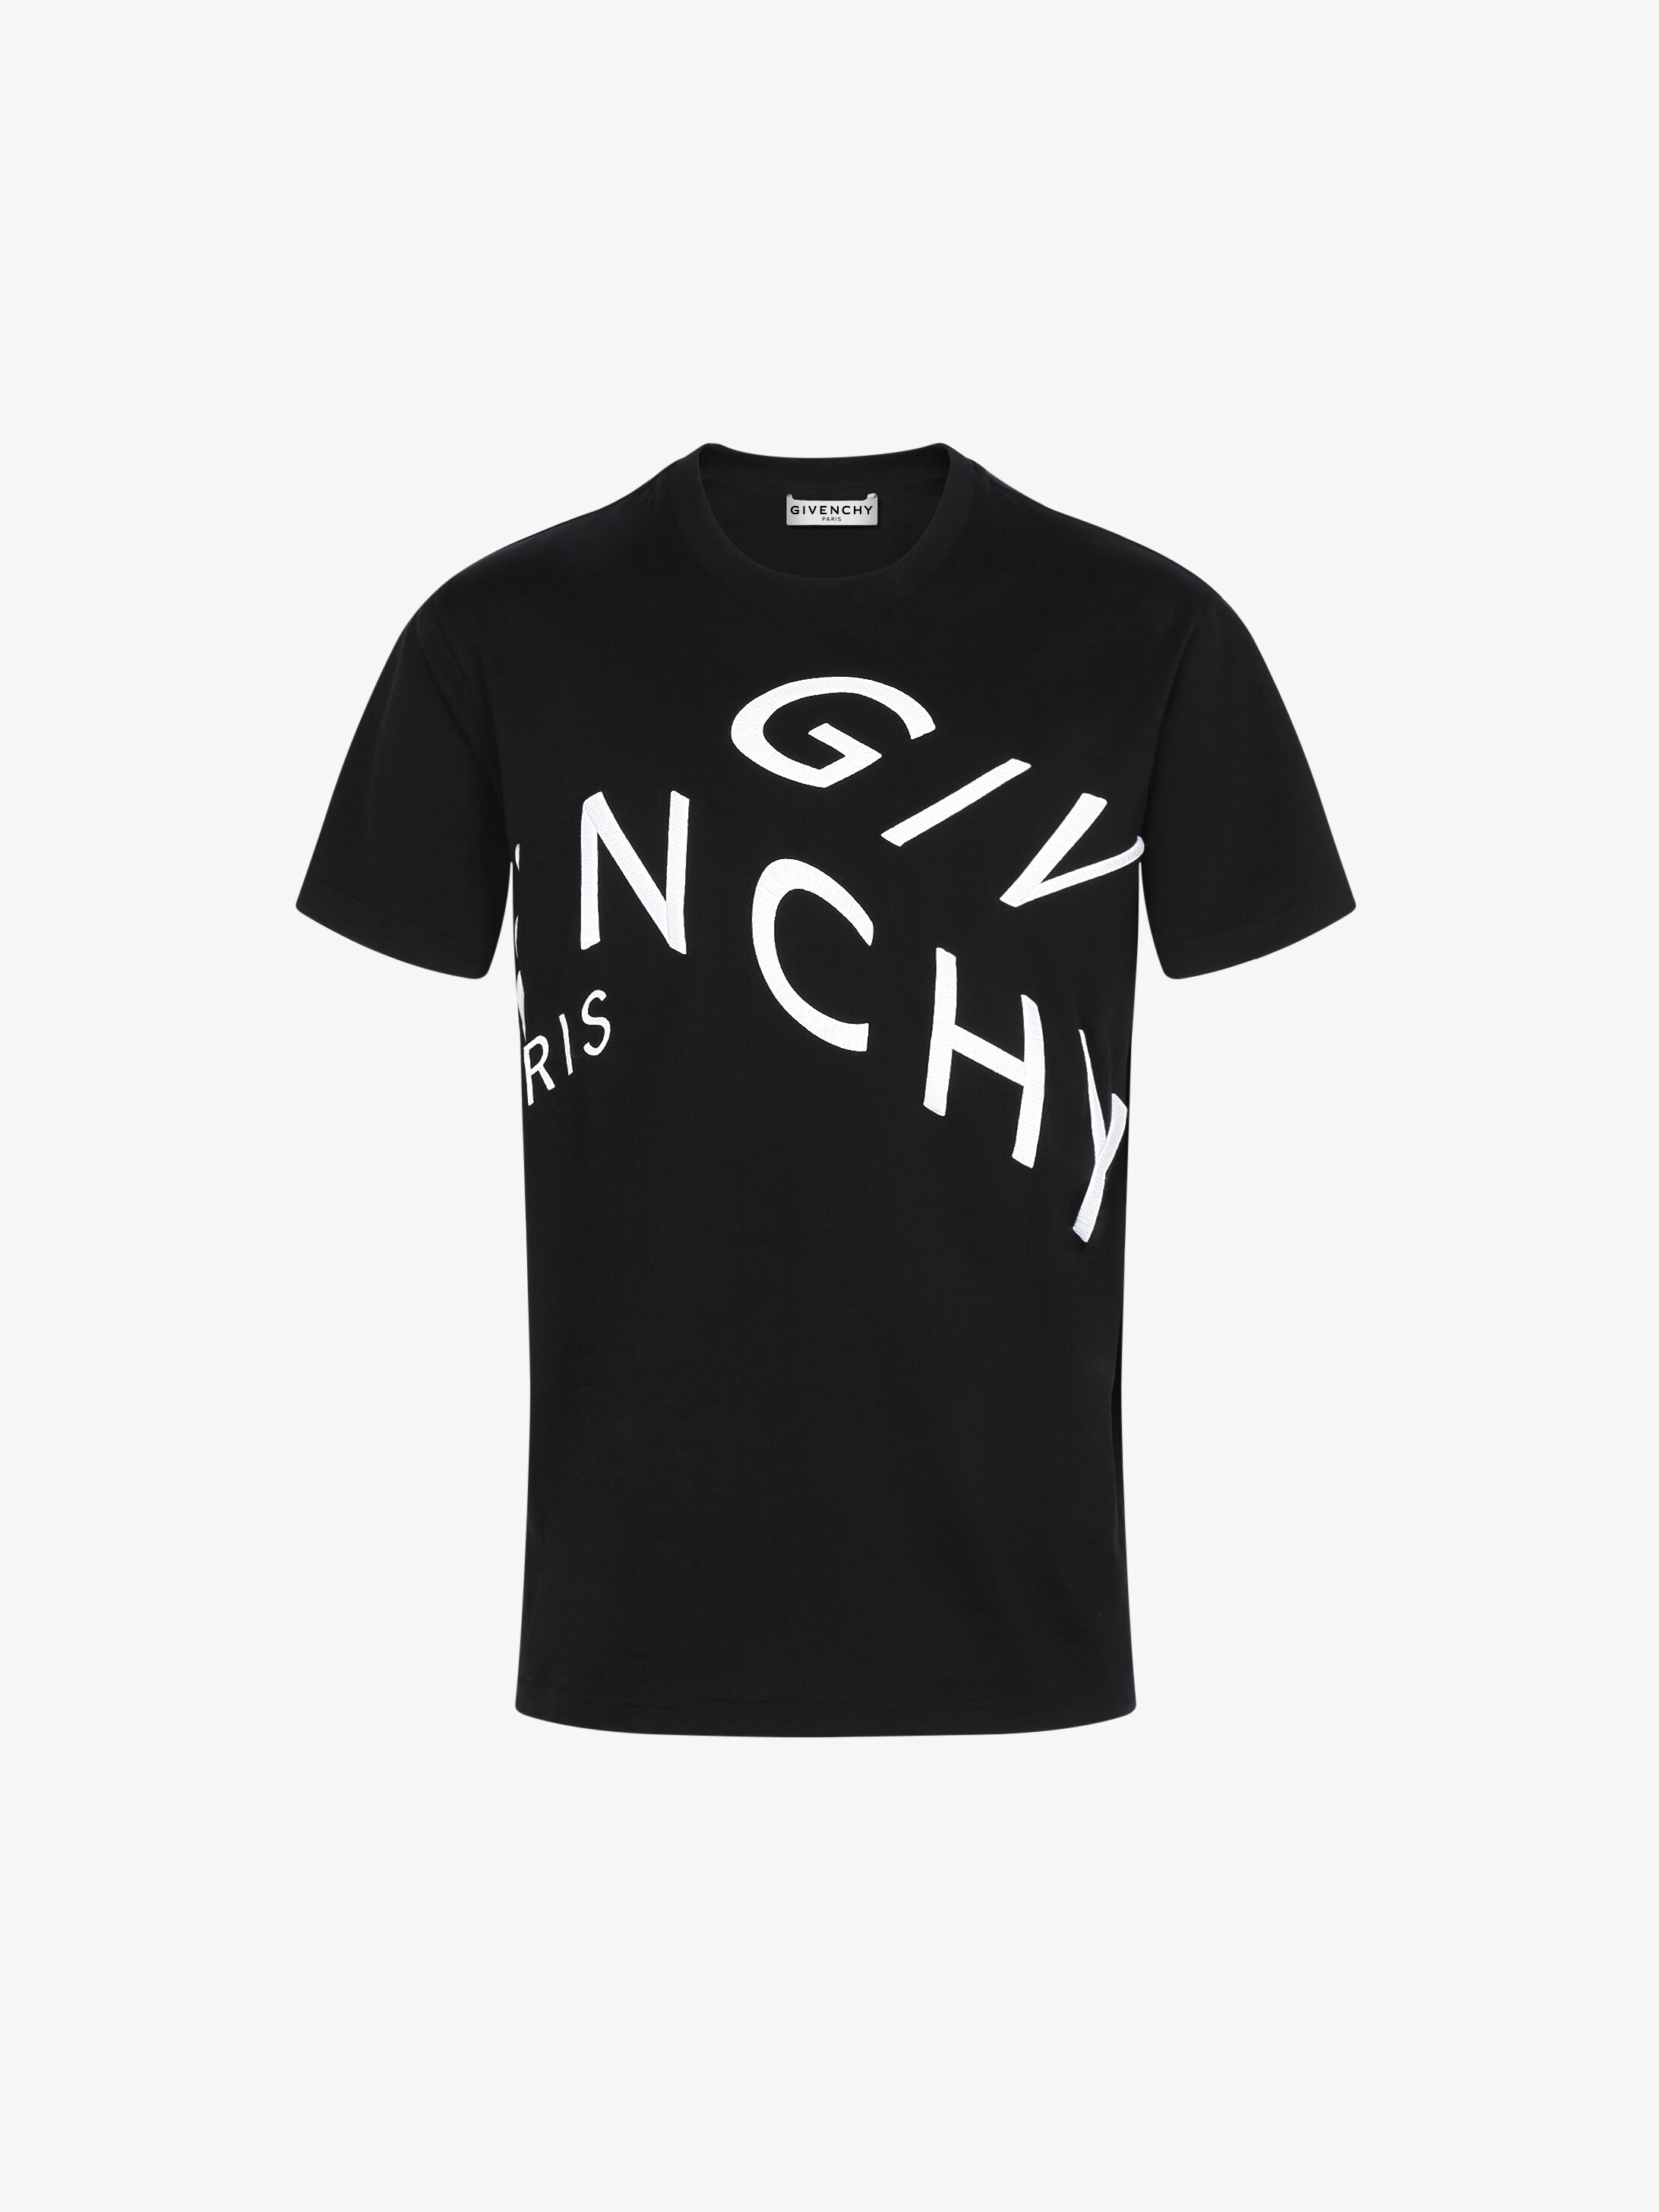 givenchy t shirt price